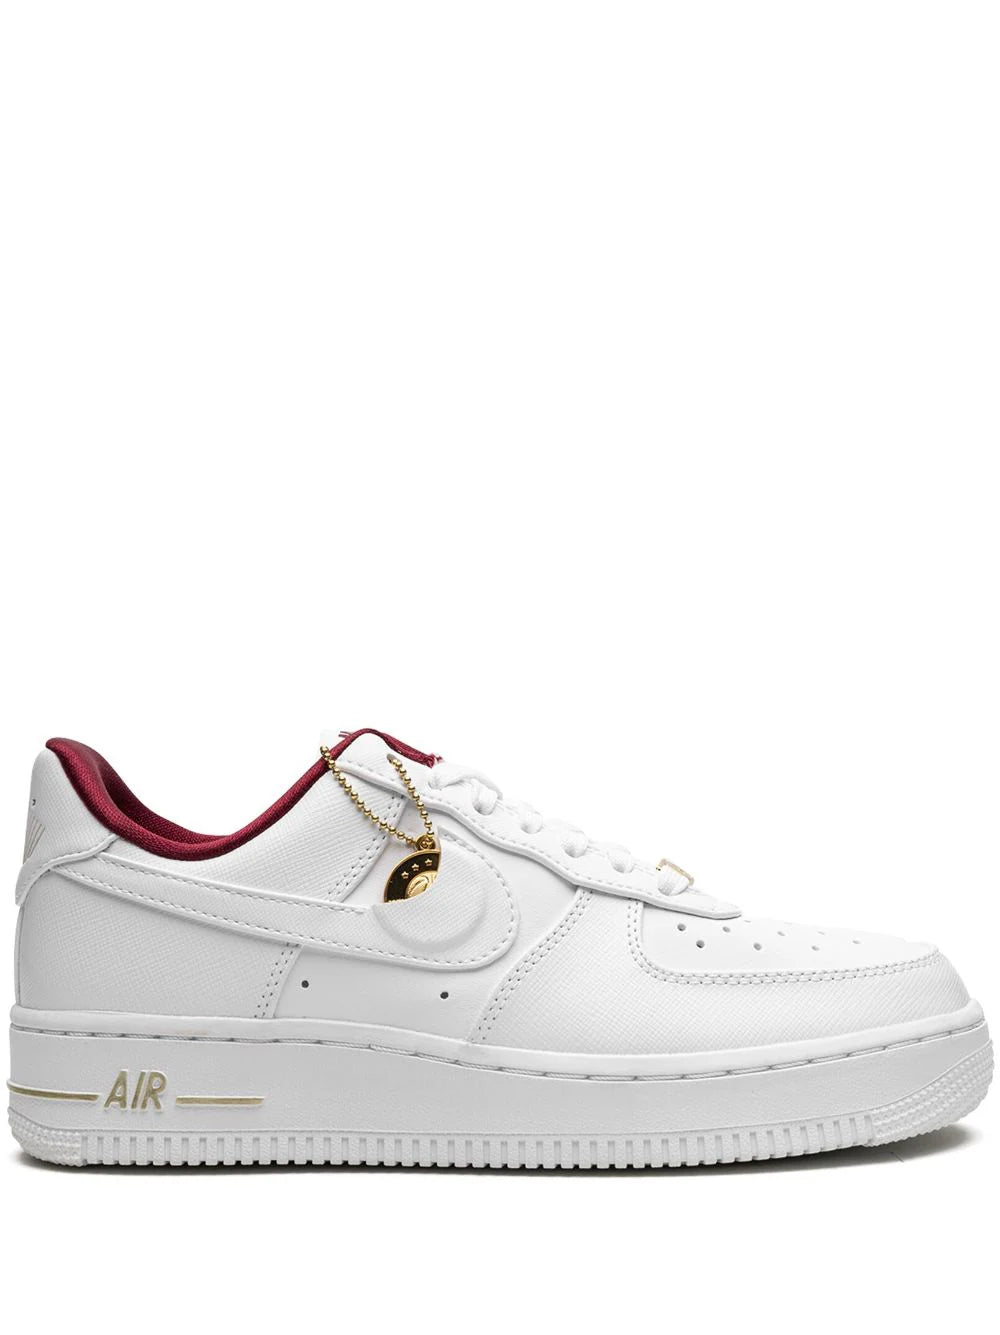 Size 10 - Nike Air Force 1 Low '07 LV8 Triple Red - DS - Send Offers!